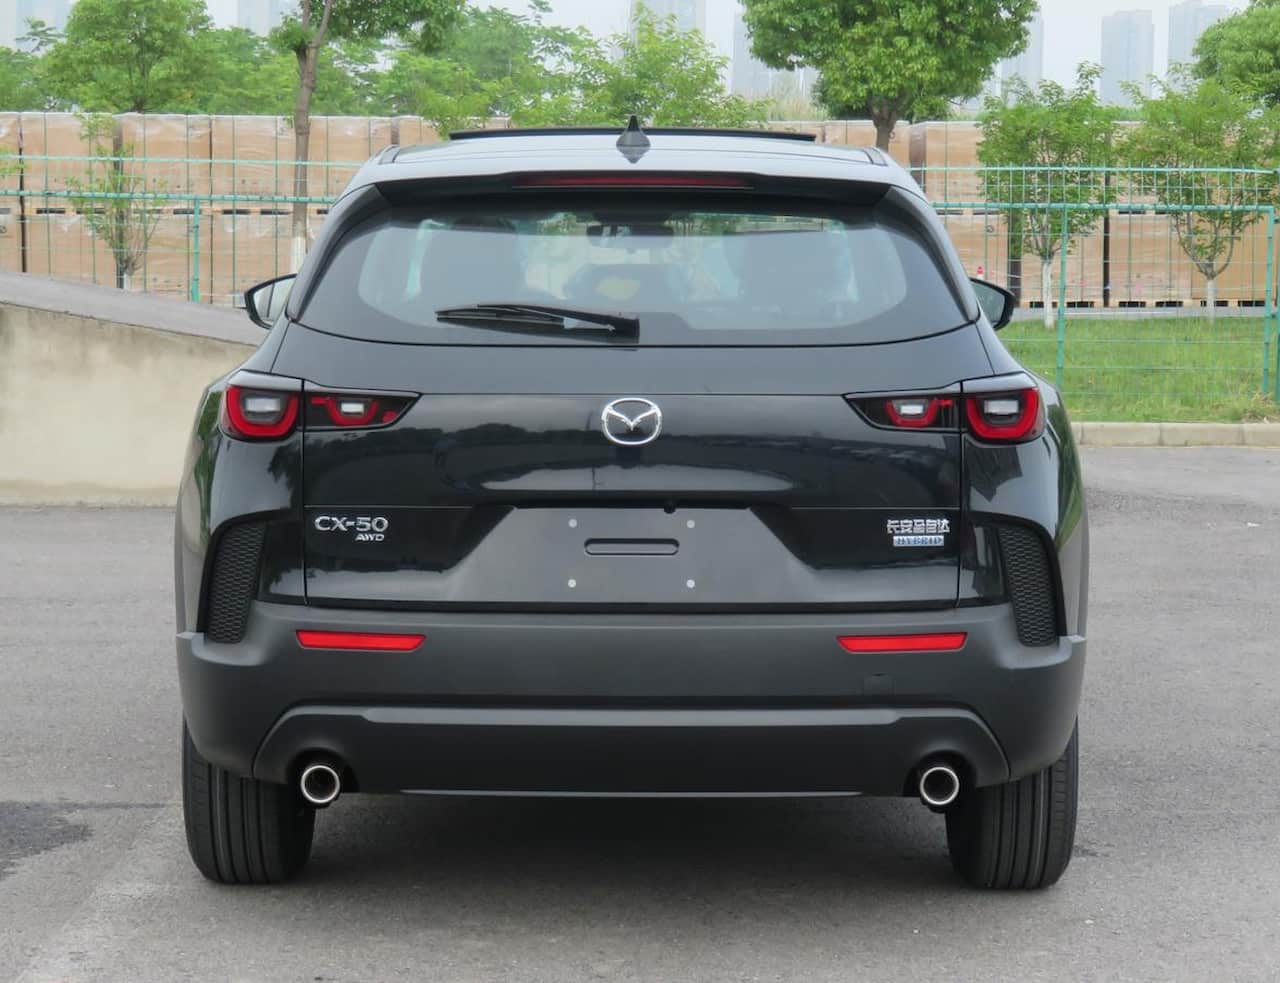 Mazda CX50 Hybrid for the U.S. Here's what we expect